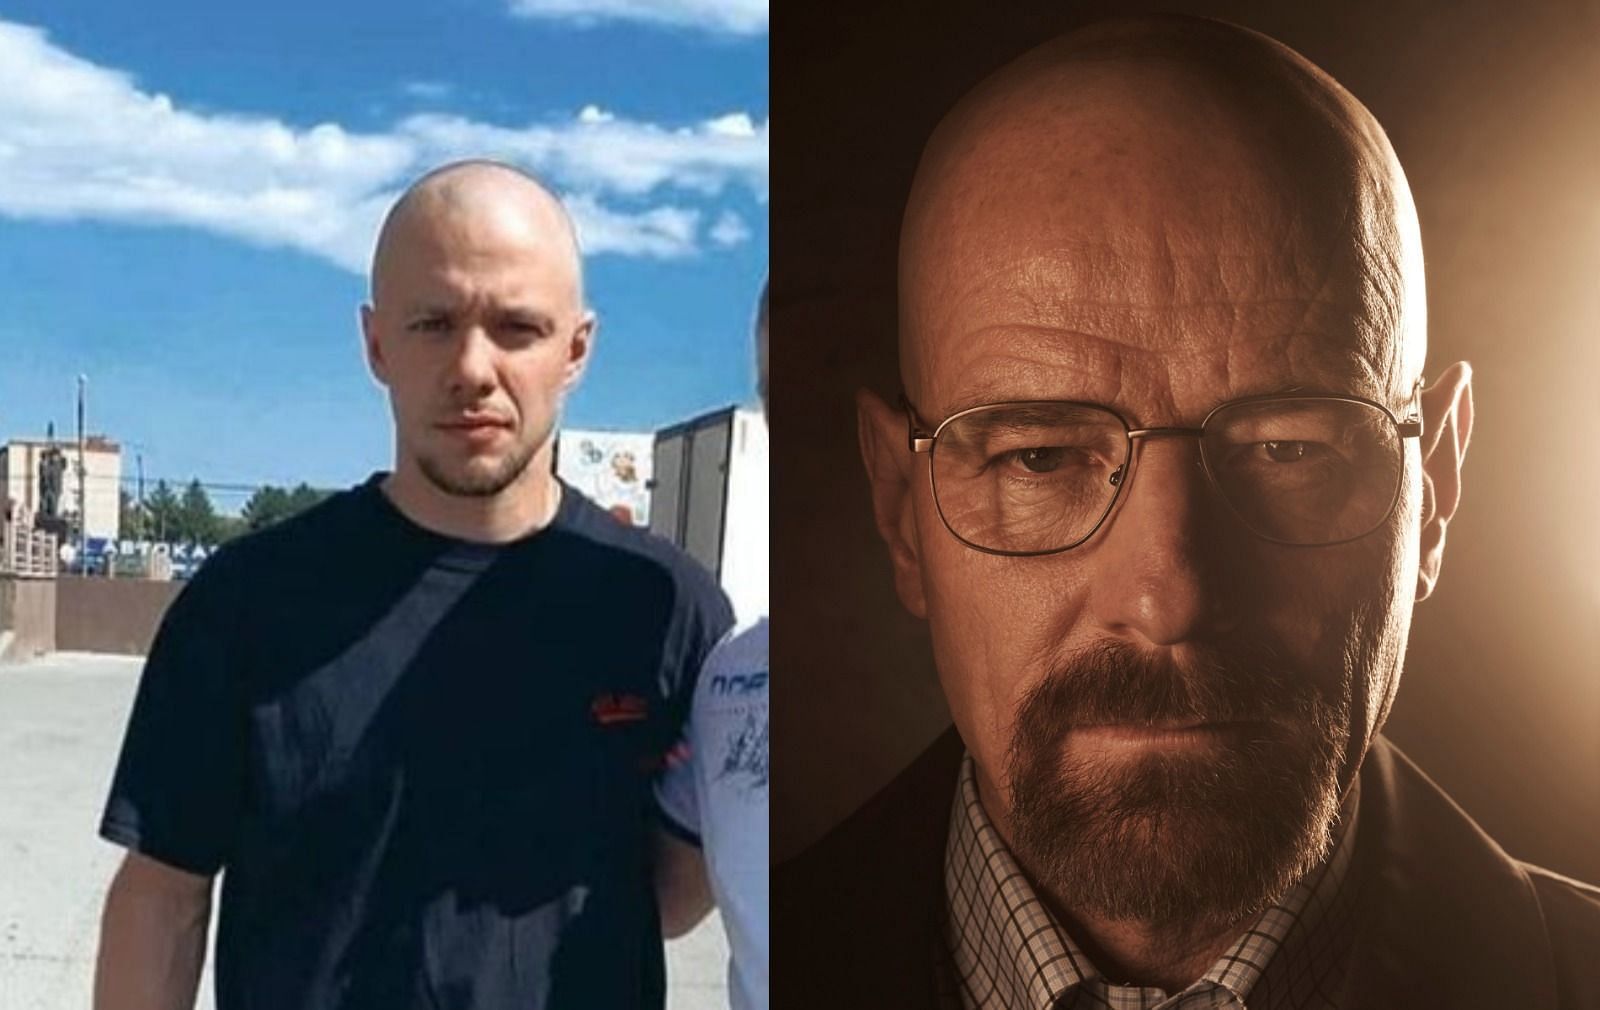 Fans think Artemi Panarin's new haircut resembles Breaking Bad